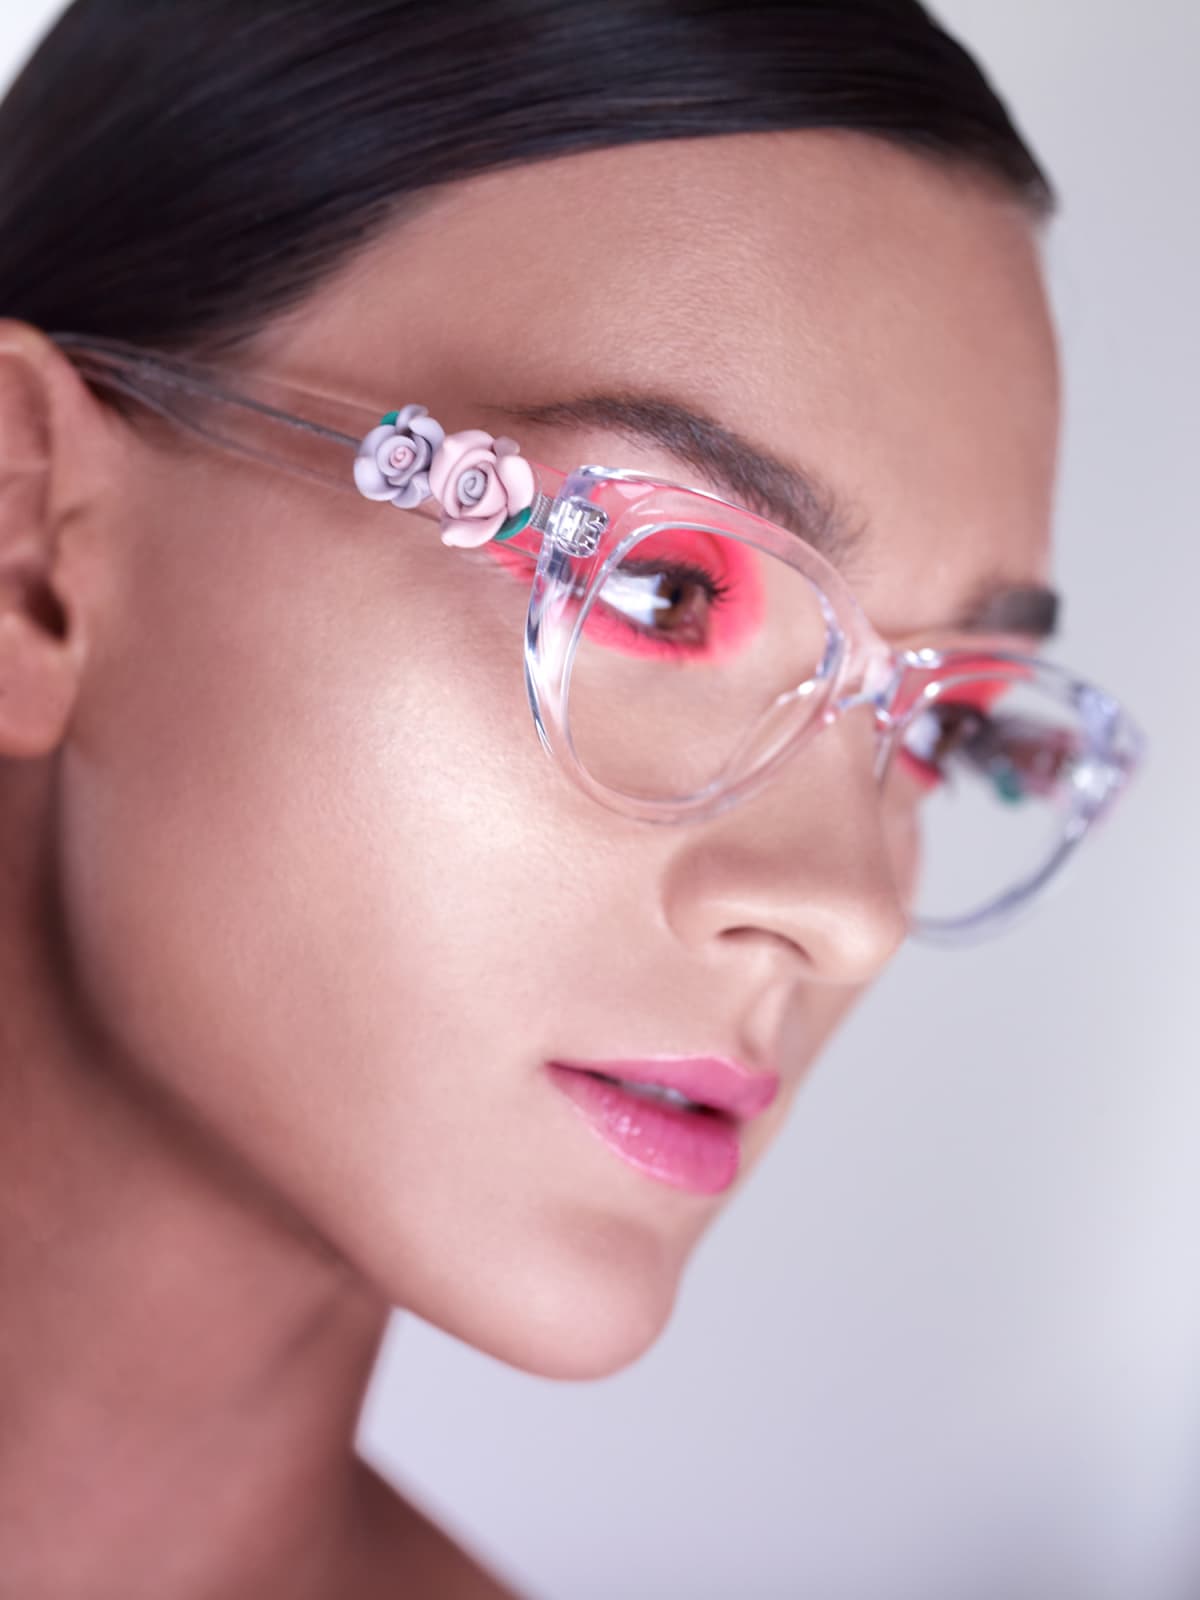 Woman wearing clear frames with flowers showcasing pink makeup and eyebrows